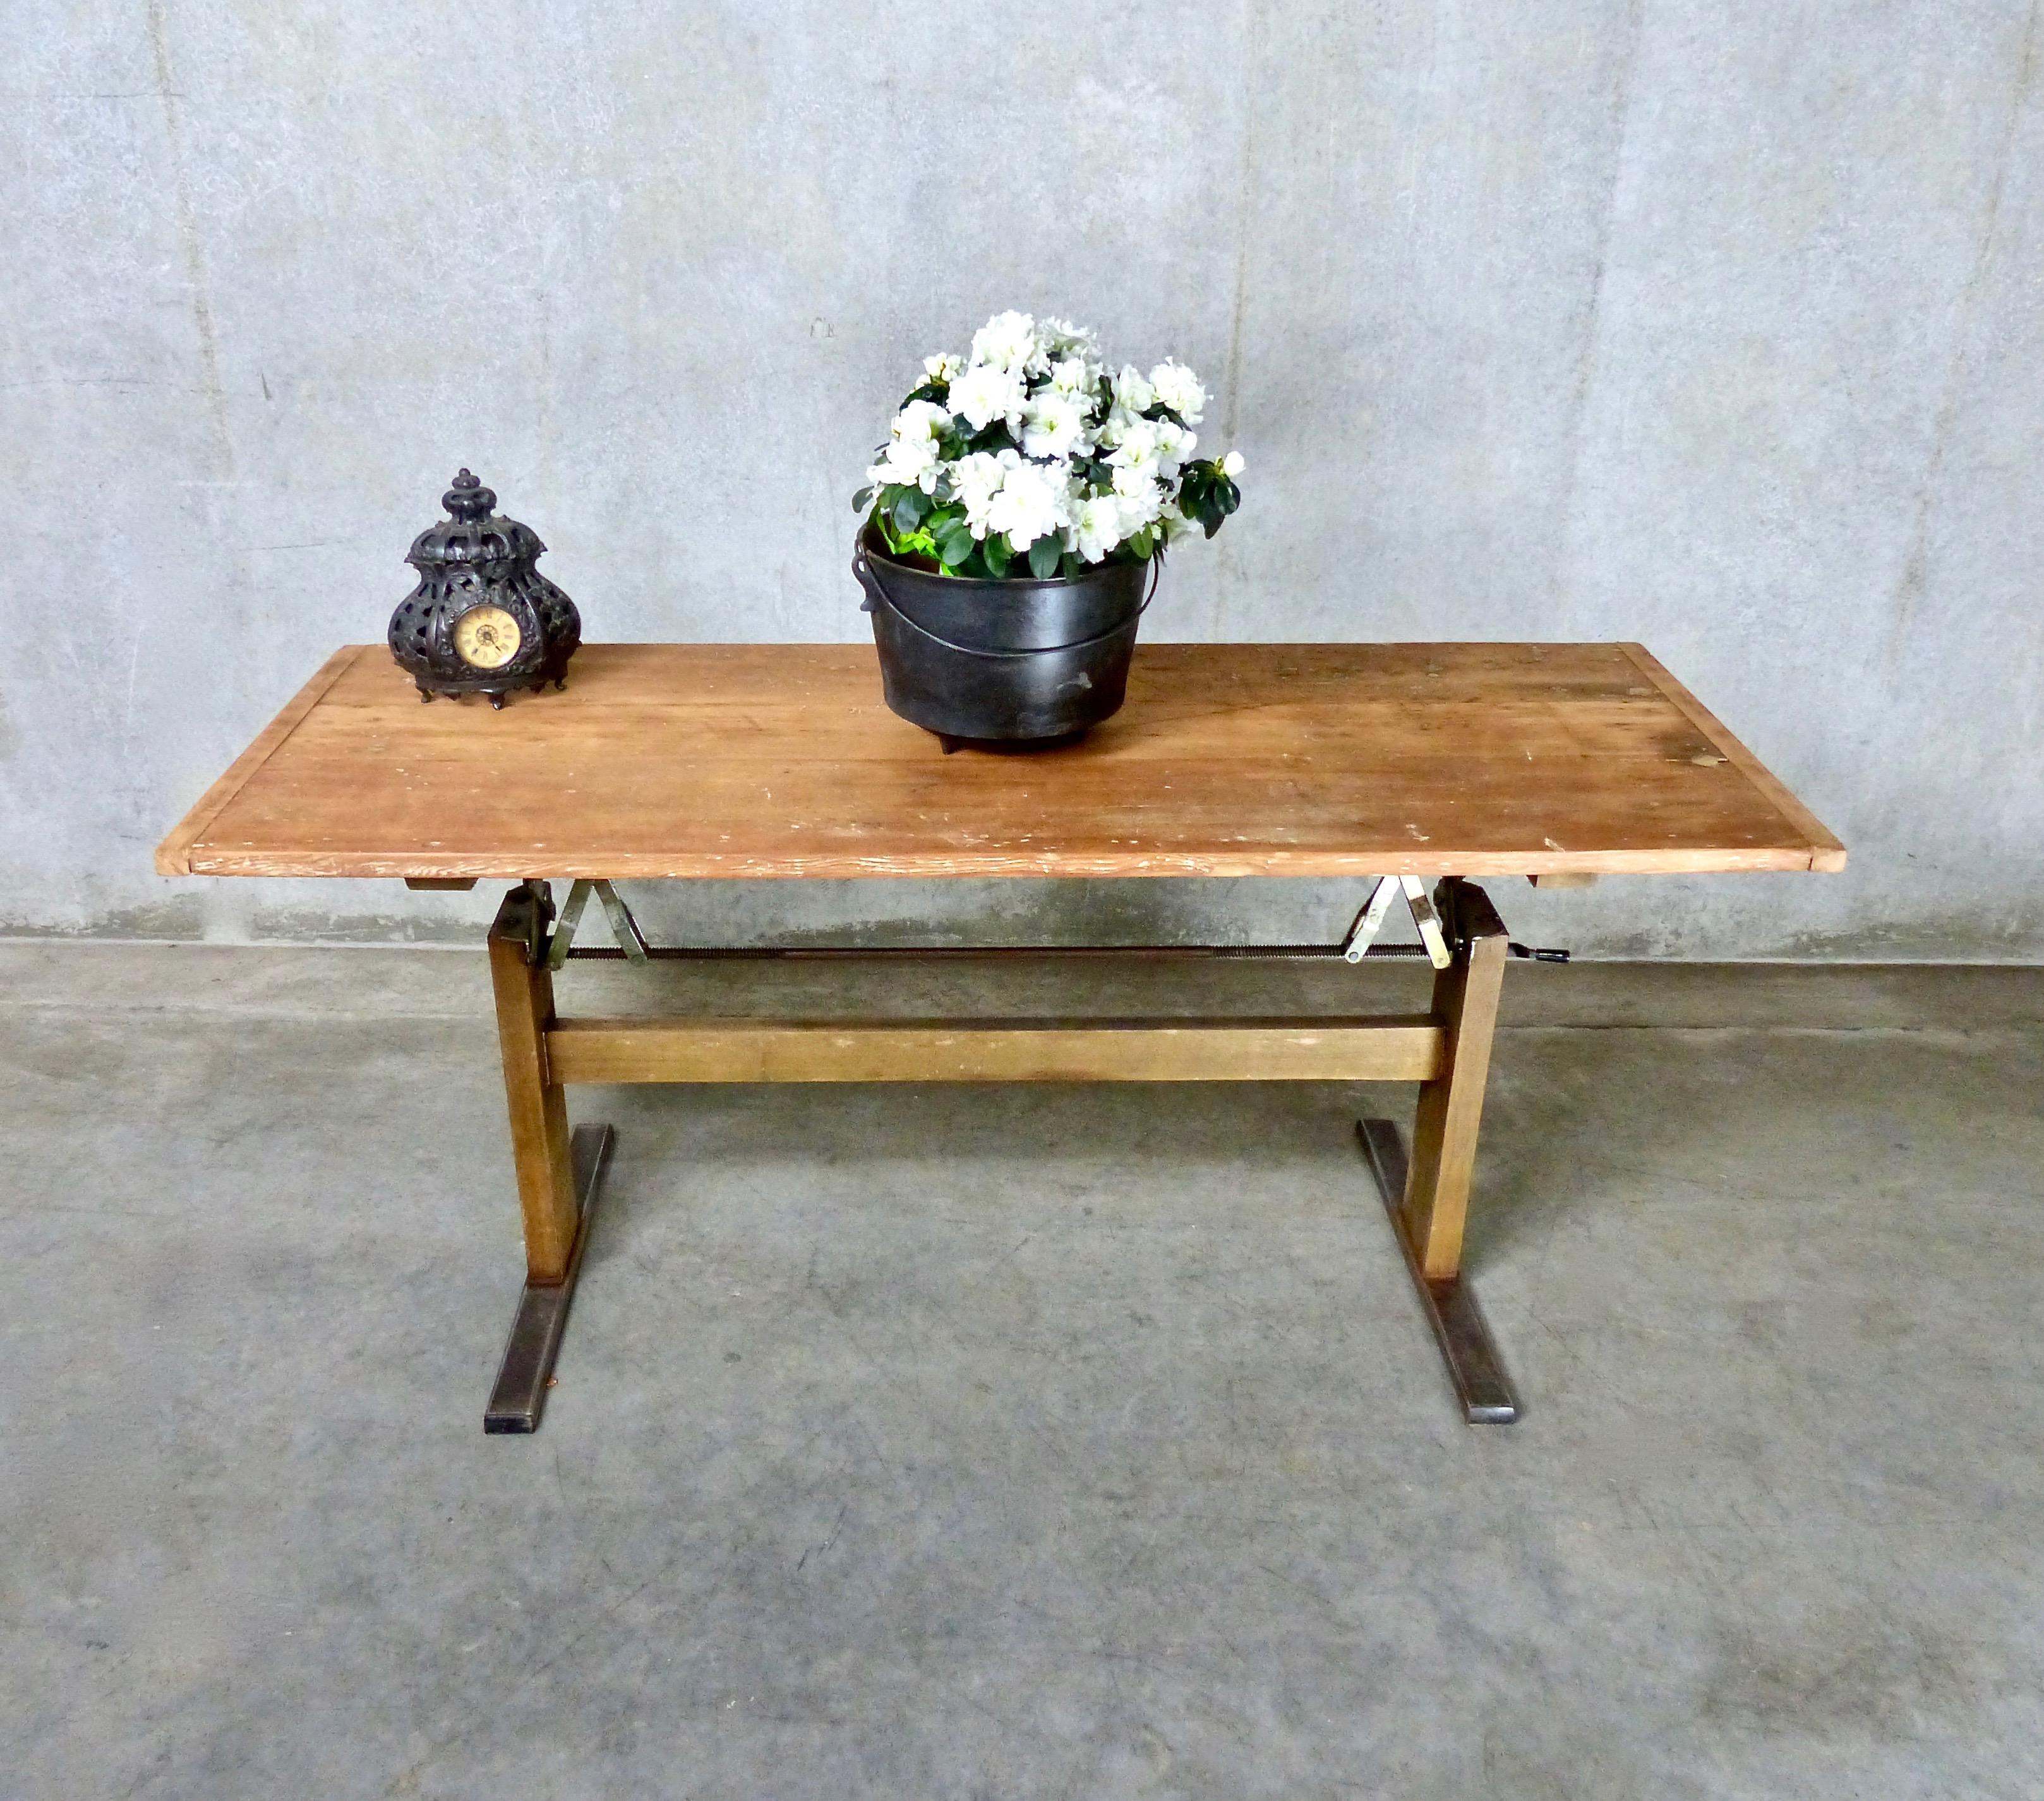 adjustable height wooden table